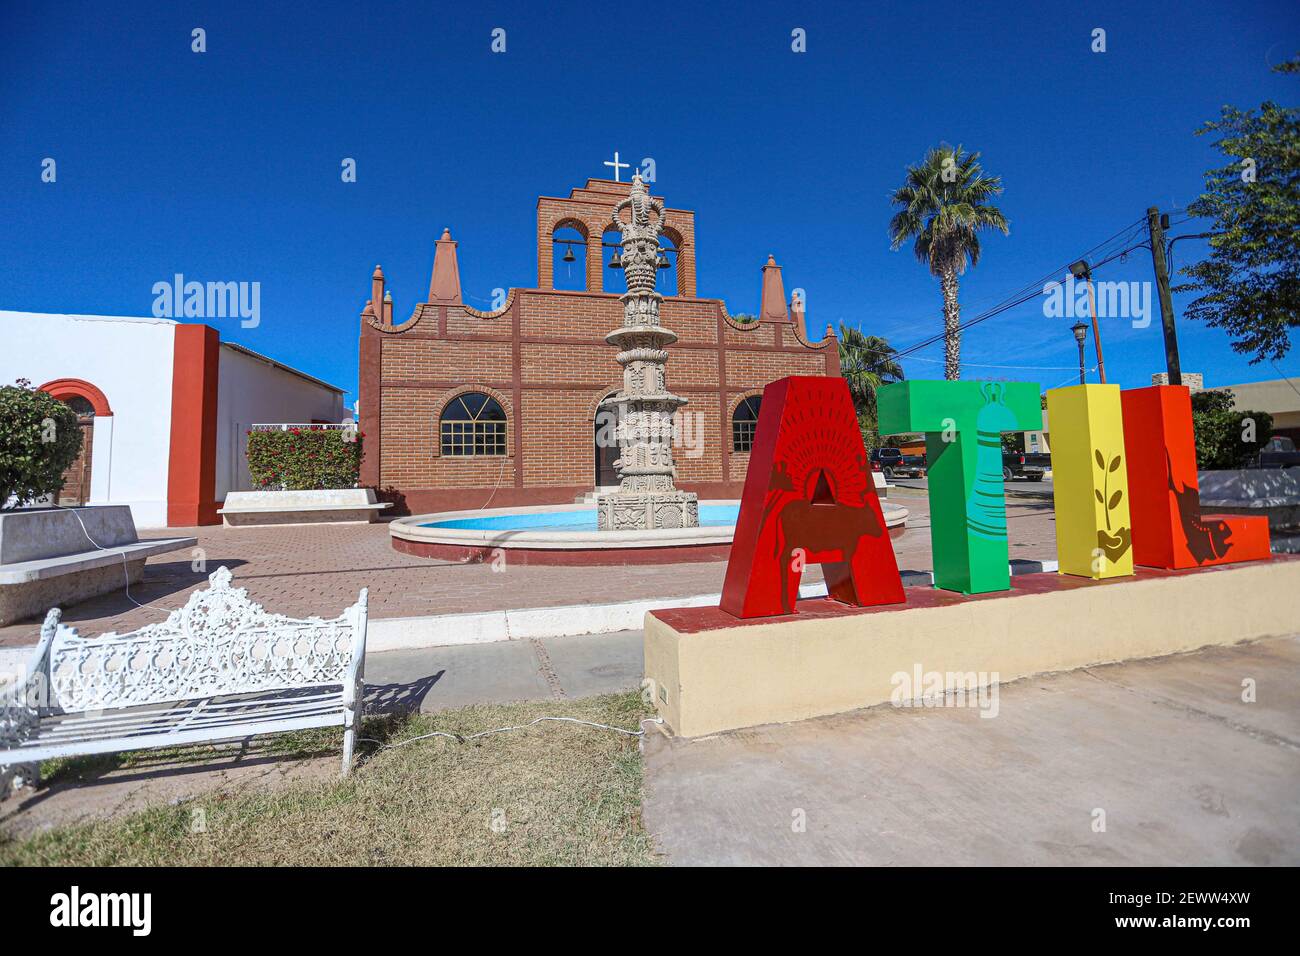 Fountain, monumental colored letters and Temple of San Francisco de Asís in Atil, Sonora Mexico. Atil small town in the northwest of the Mexican state of Sonora. The neighboring municipalities are Tubutama, Trincheras, Oquitoa and Altar. It was founded in 1751 Jesuit missionary Jacobo Sedelmayer. The first inhabitants were the Pima Alto or Nebome Indians. Atil means 'Arrowhead', in the Pima language.  (Photo by Luis Gutierrez / Norte Photo)  Fuente, letras monumentales de colores y Templo de San Francisco de Asís en Atil, Sonora Mexico. Átil pequeño pueblo en el noroeste del estado mexicano de Stock Photo